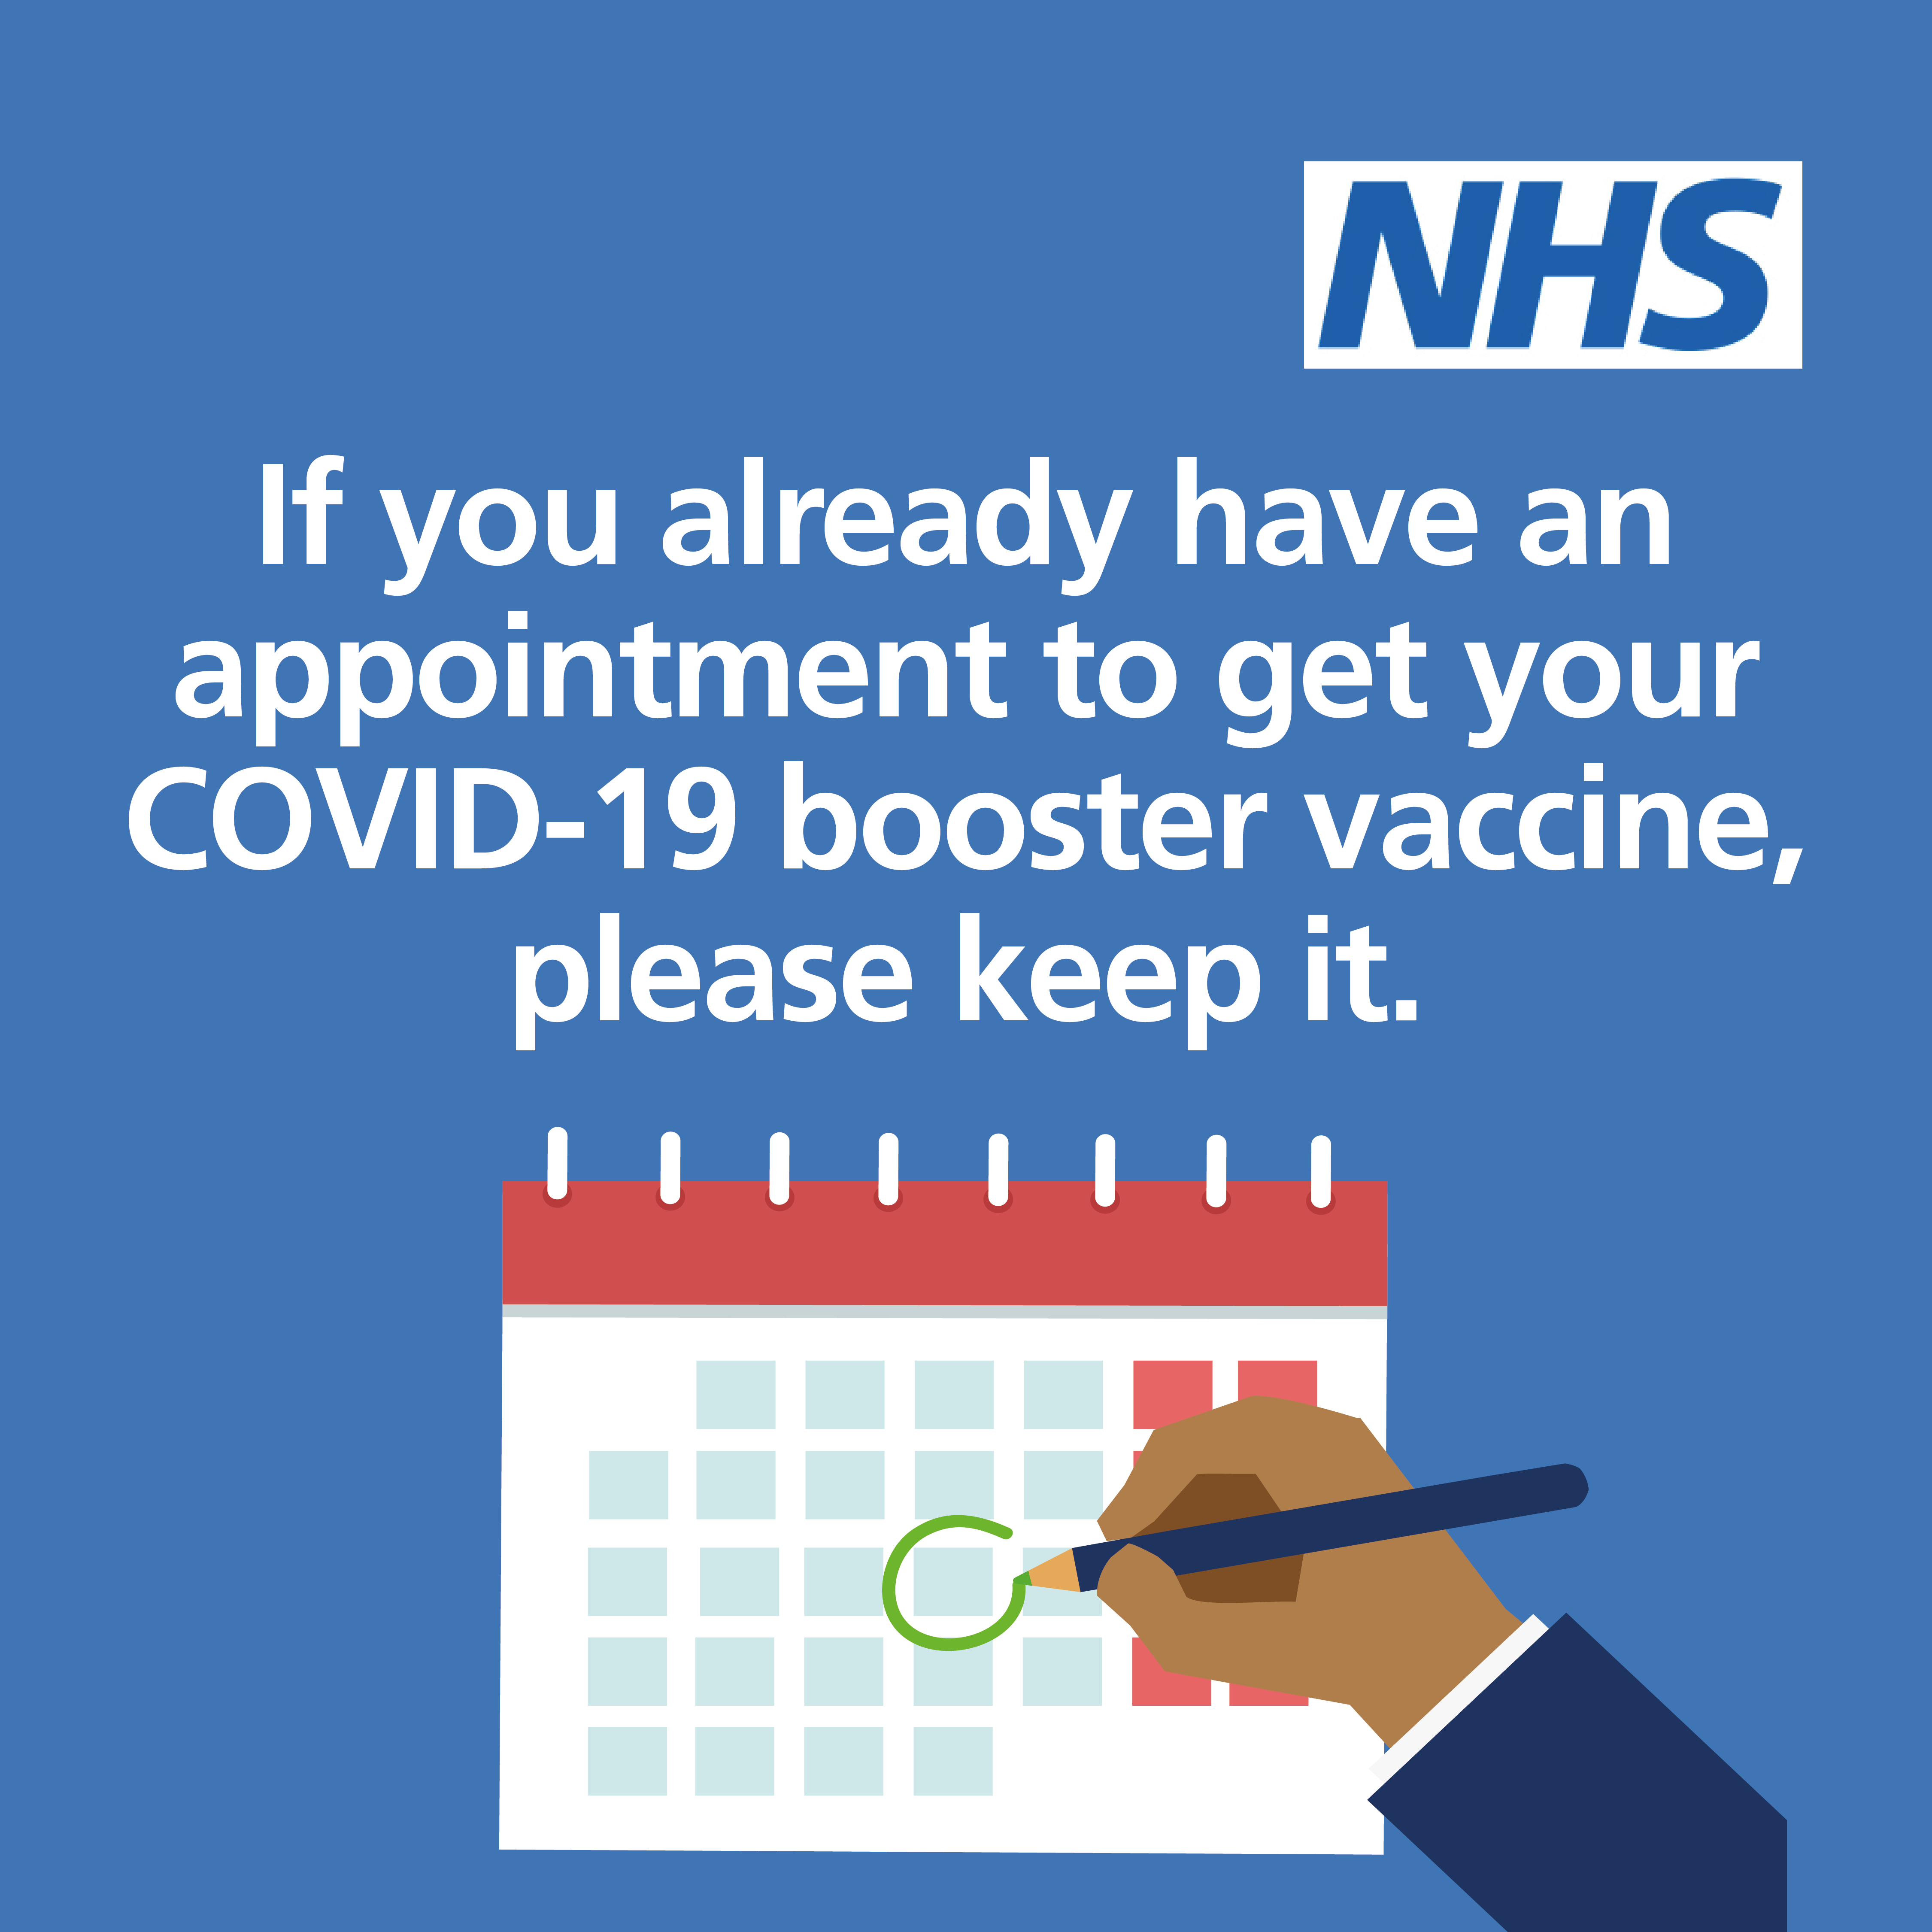 If you already have an appointment to get your COVID-19 booster vaccine, please keep it